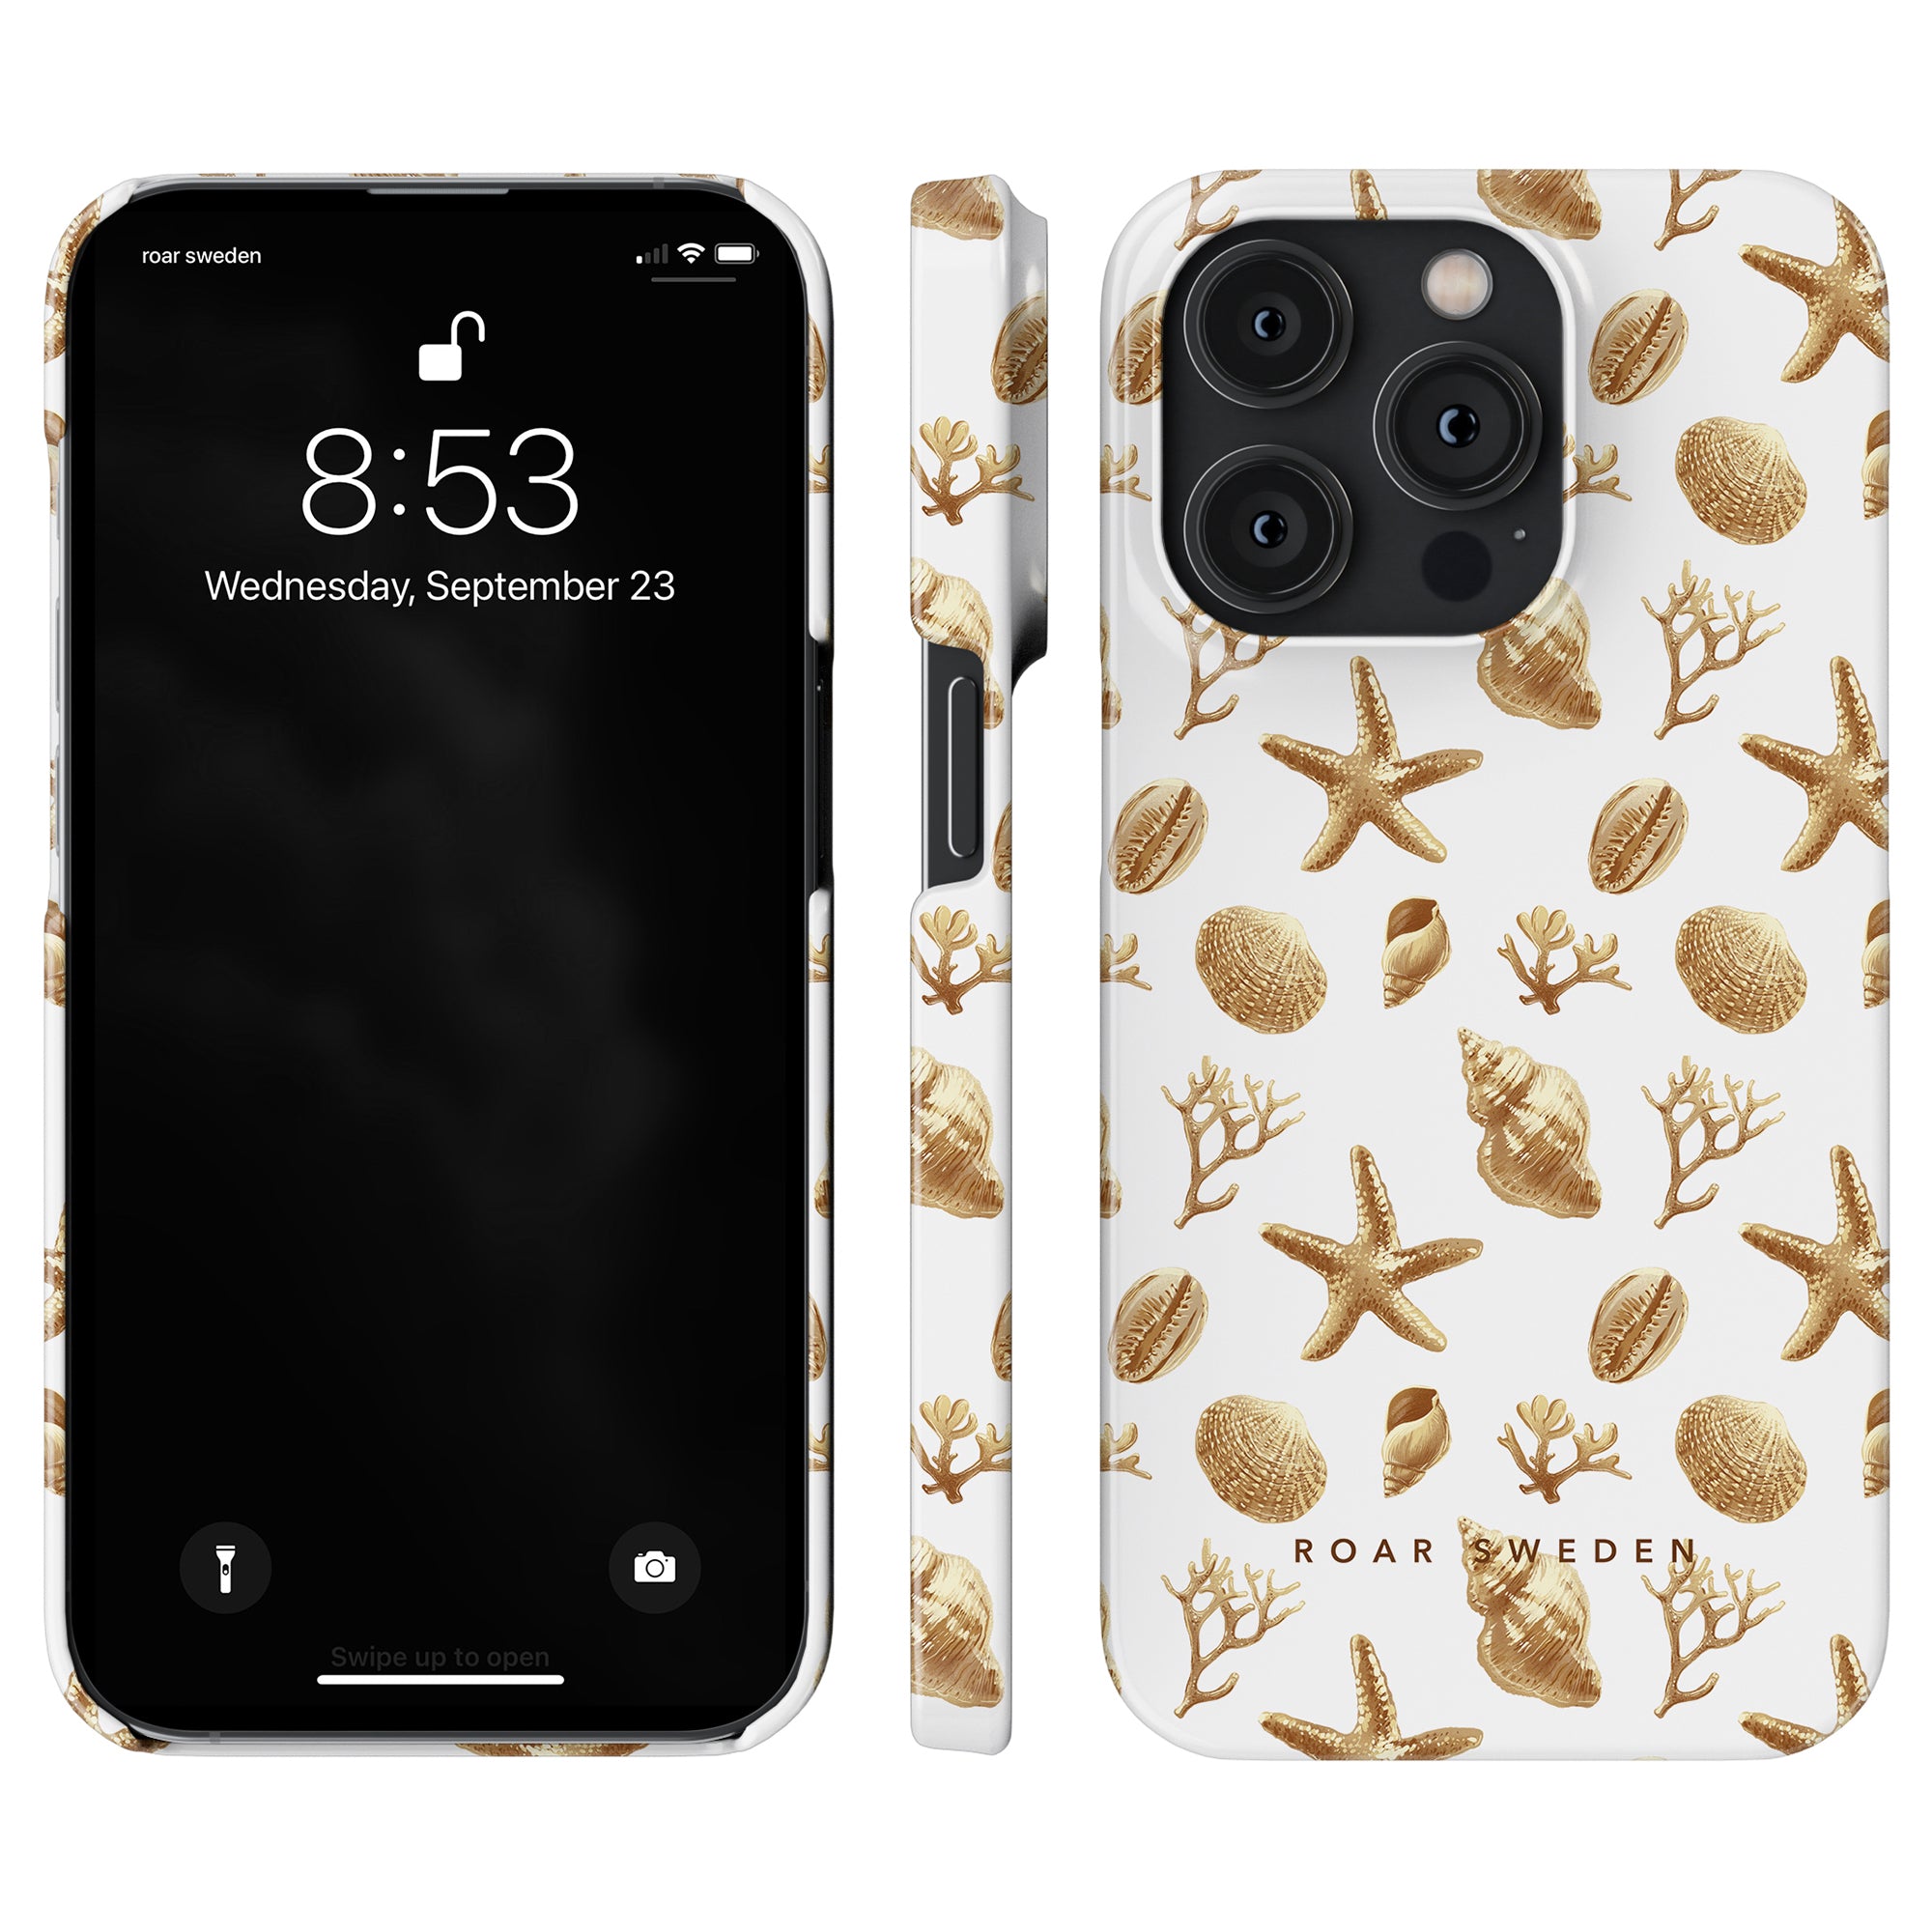 Black smartphone with a Golden Shells - Slim case featuring gold turtles and text "ideal of sweden" on a white background.